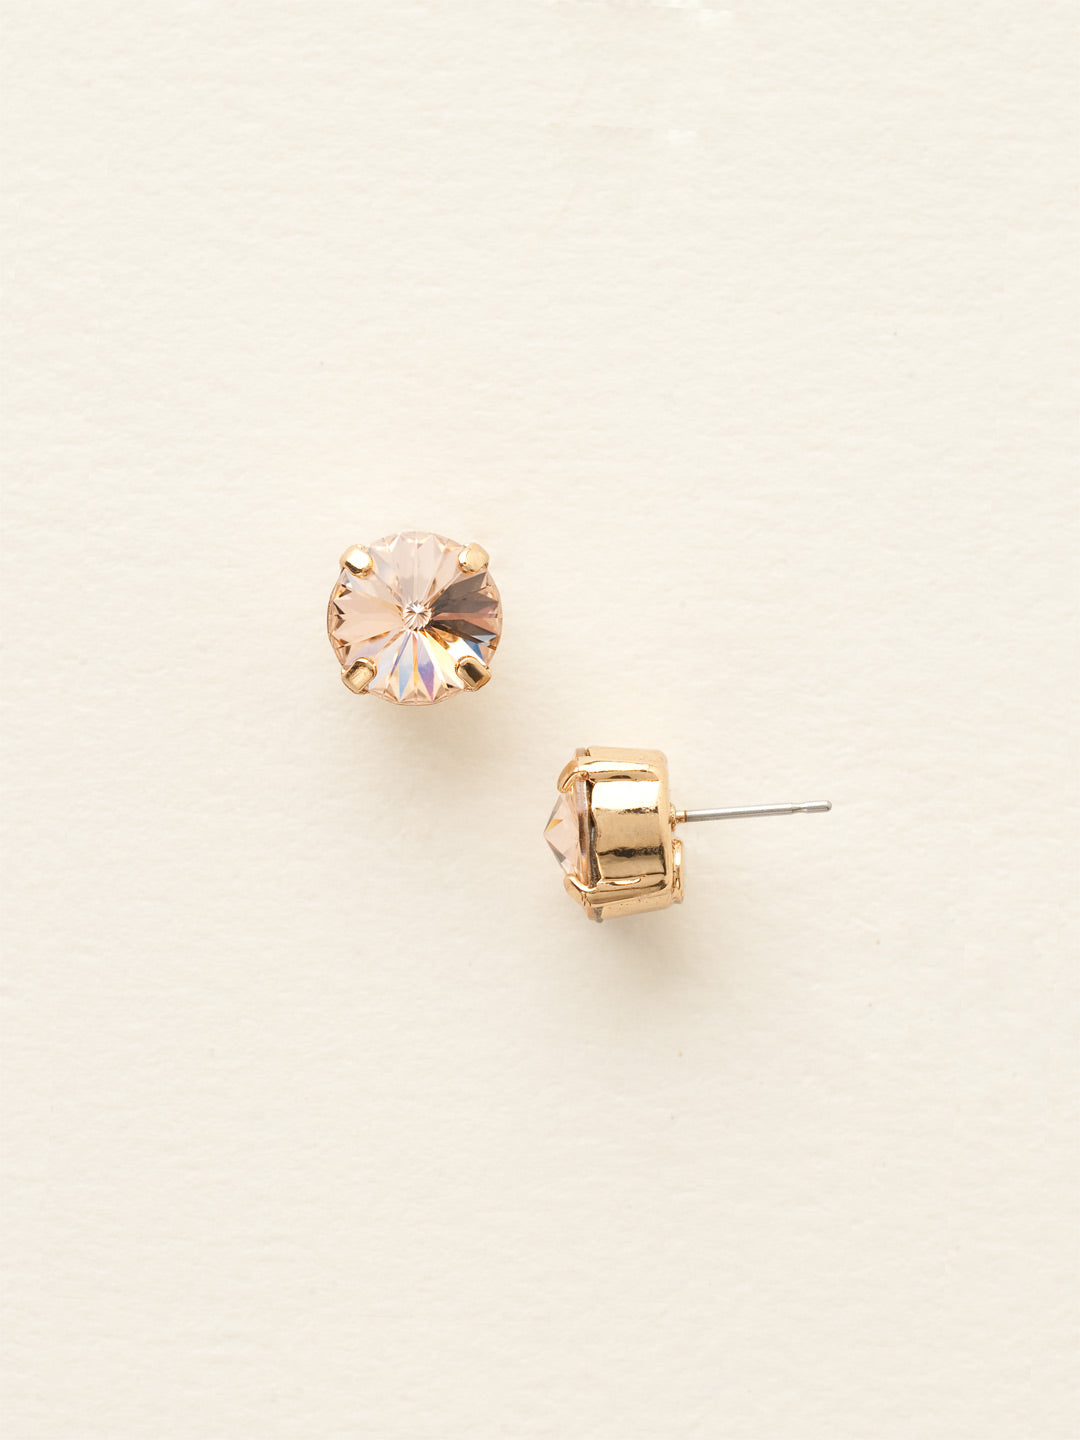 London Stud Earrings - ECM14BGLPE - <p>Everyone needs a great pair of studs. Add some classic sparkle to any occasion with these stud earrings. Need help picking a stud? <a href="https://www.sorrelli.com/blogs/sisterhood/round-stud-earrings-101-a-rundown-of-sizes-styles-and-sparkle">Check out our size guide!</a> From Sorrelli's Light Peach collection in our Bright Gold-tone finish.</p>